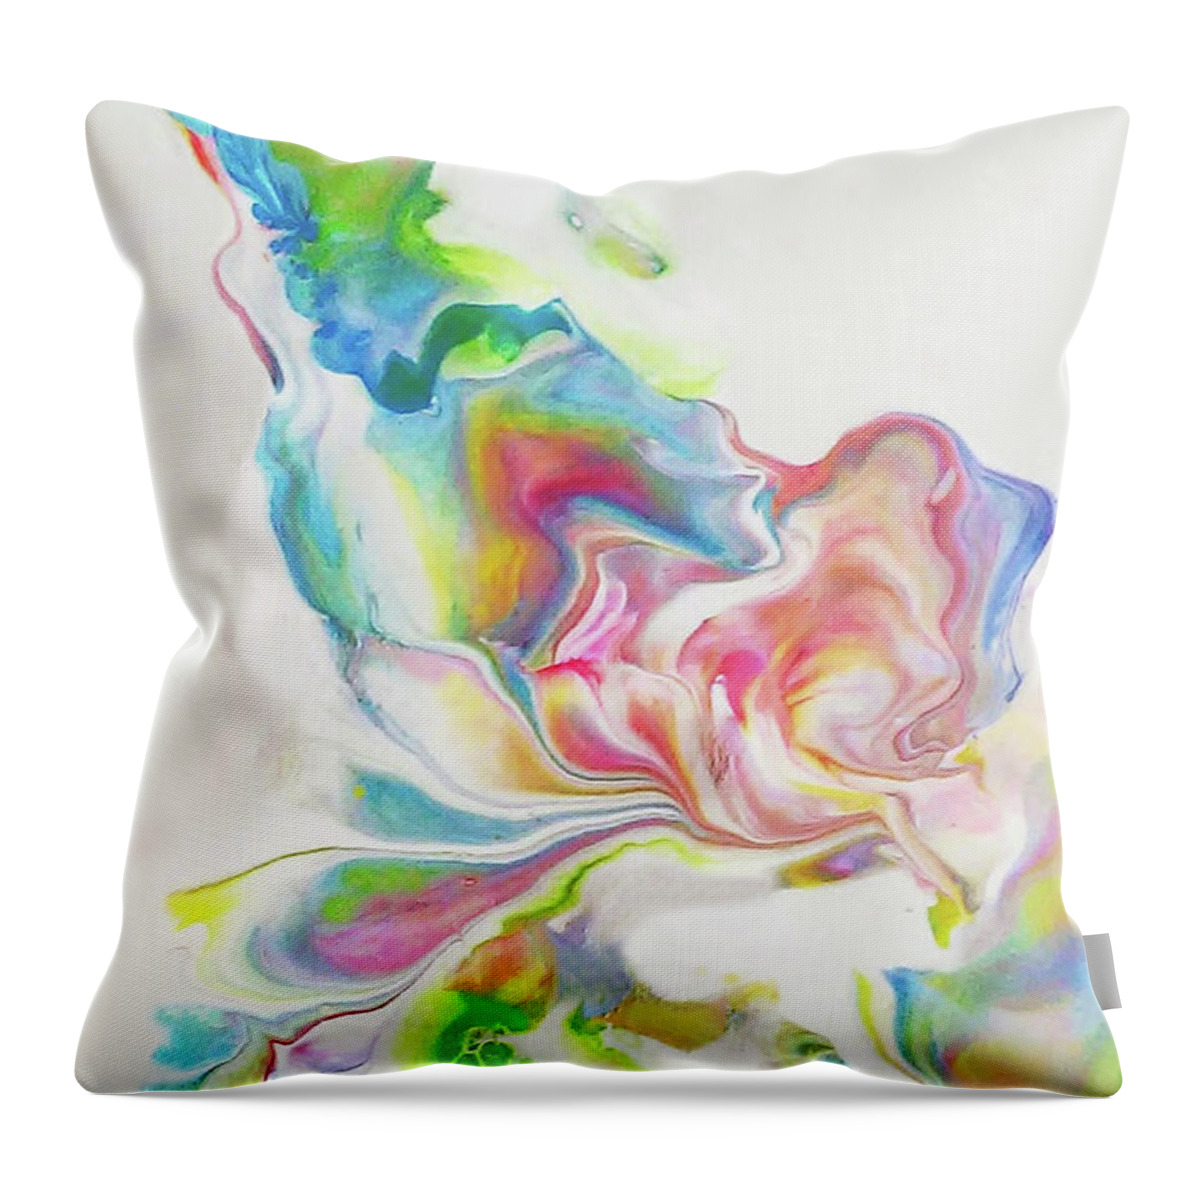 Abstract Floral Colorful Acrylic Throw Pillow featuring the painting Bloom by Deborah Erlandson